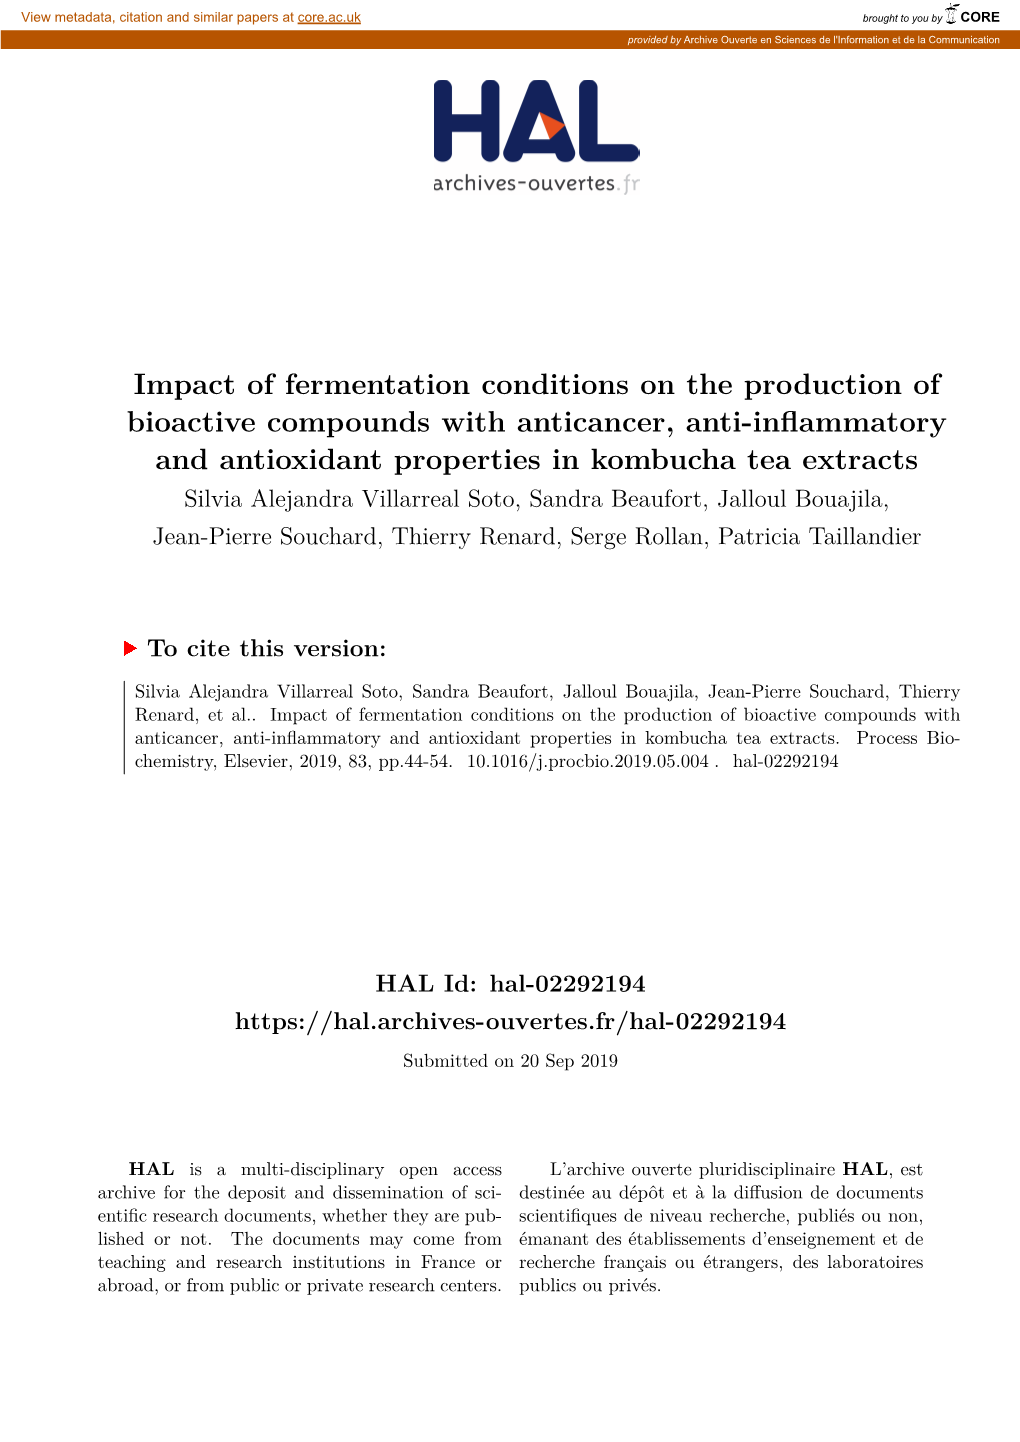 Impact of Fermentation Conditions on the Production of Bioactive